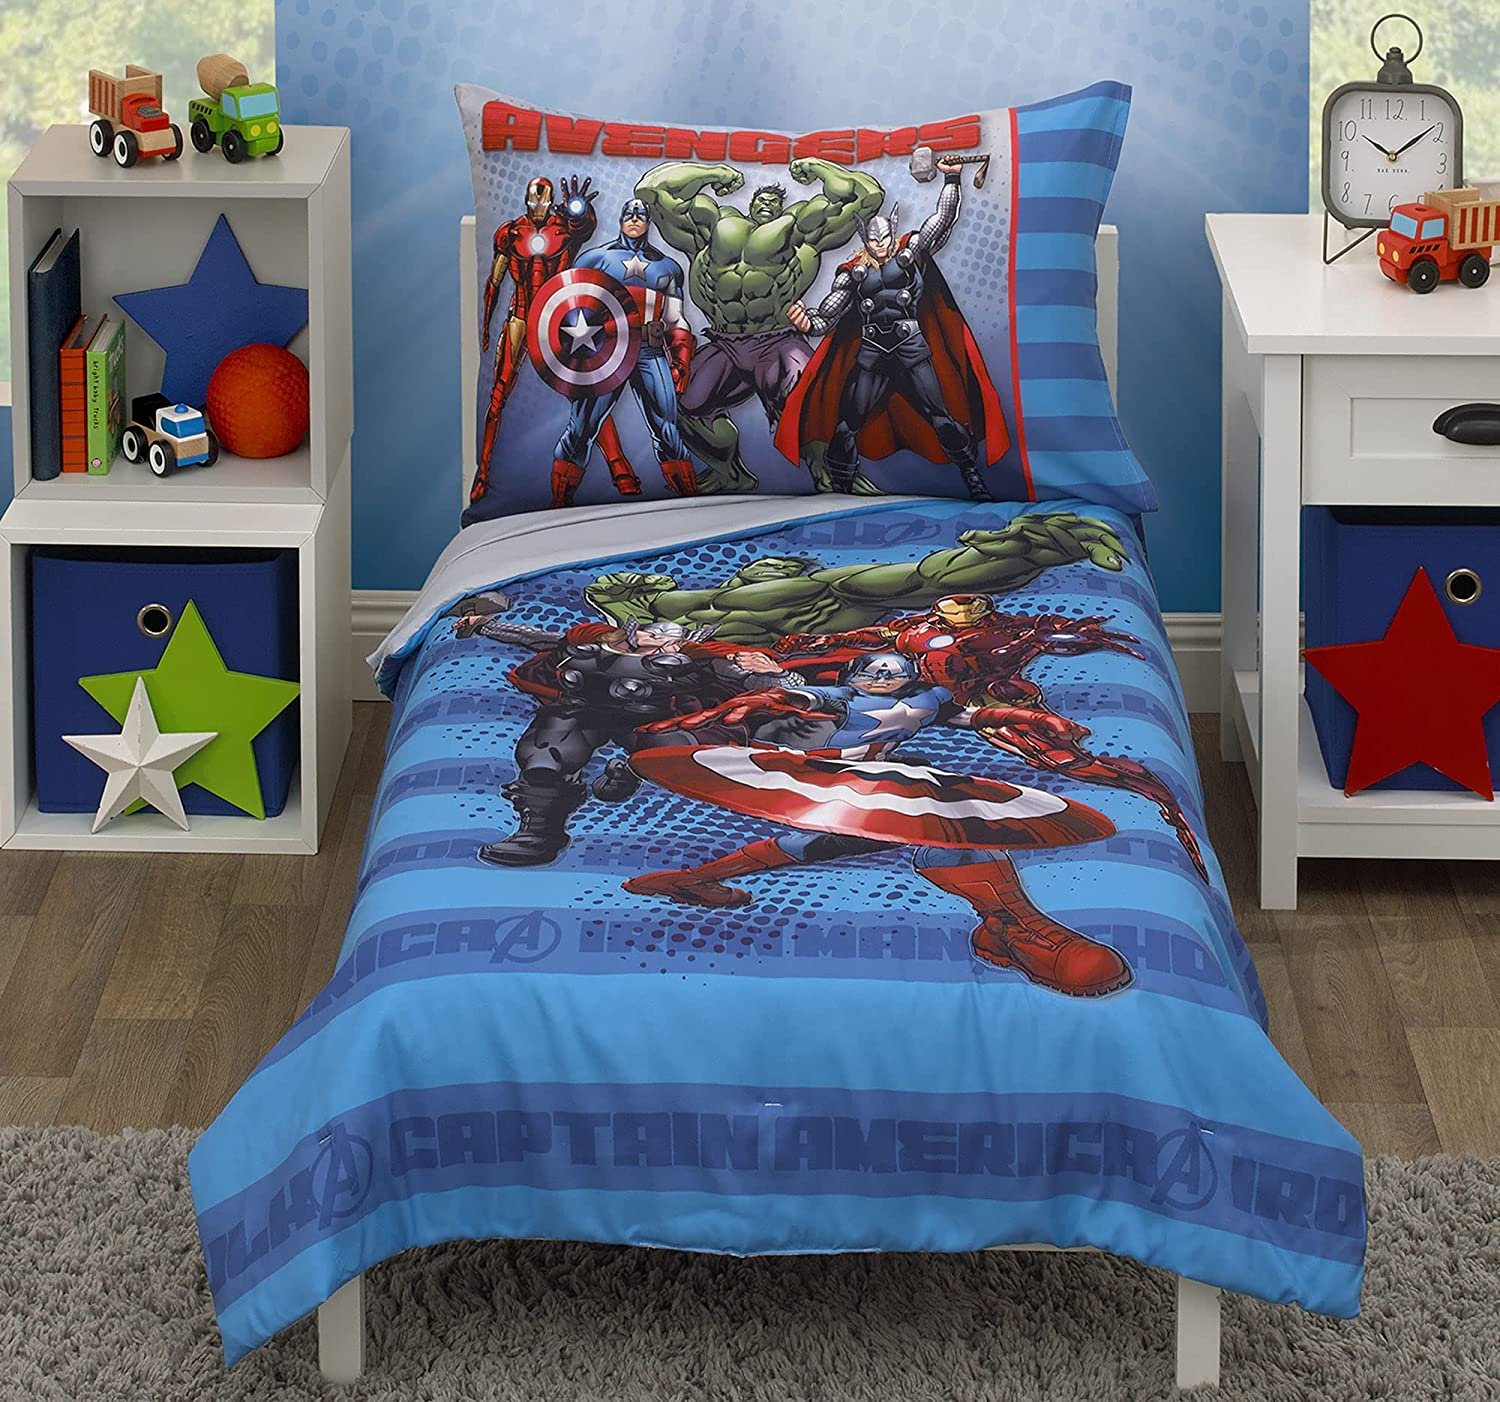 Crown Crafts Marvel Avengers 4 Piece Bedding Sets, Toddler Bed with Bedspread, Fitted Bottom Sheet, Flat Top Sheet, Pillowcase - image 1 of 7